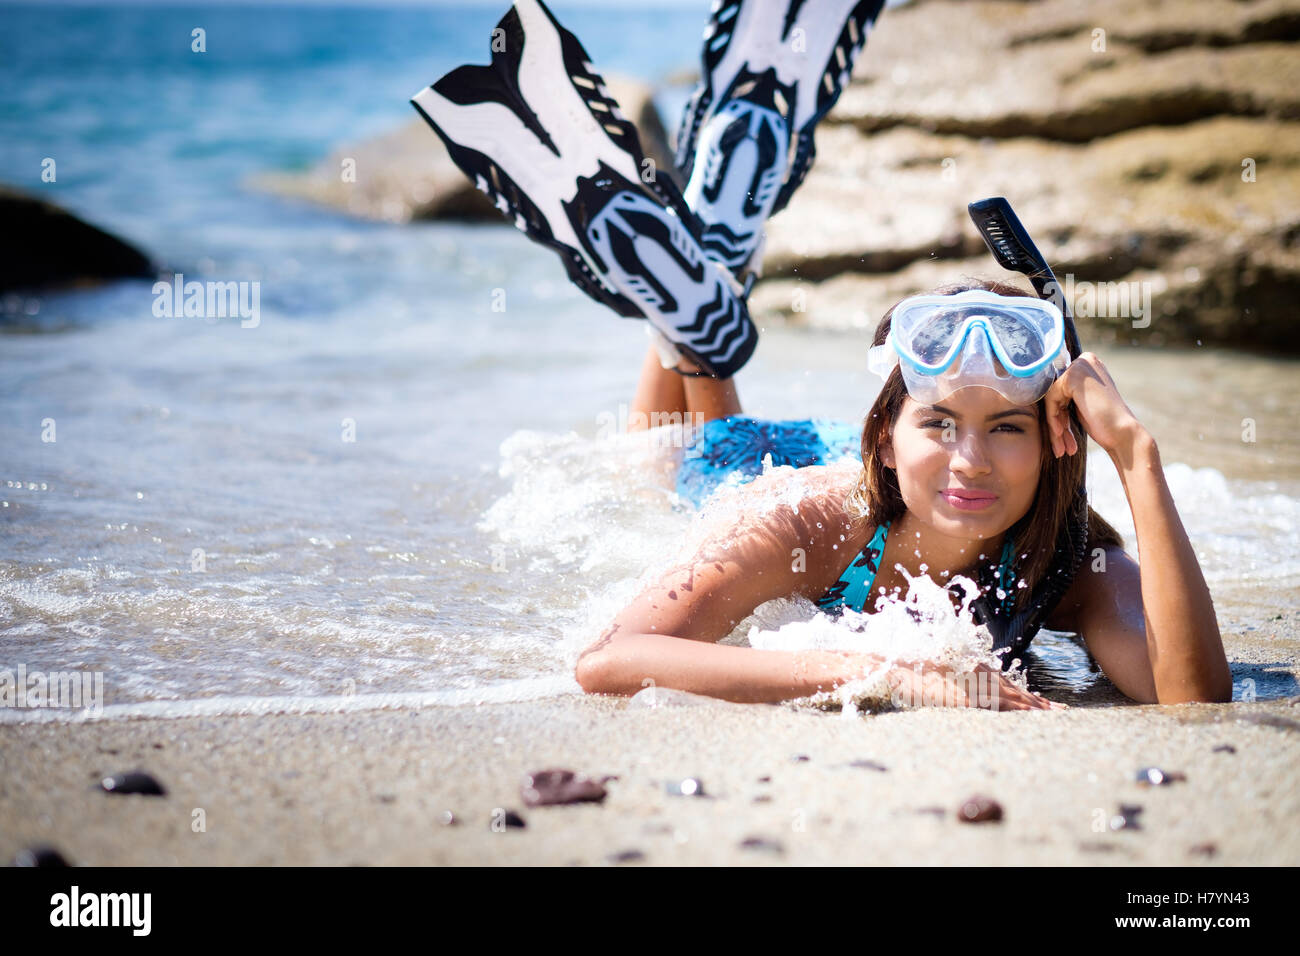 Snorkeling at the beach. Young woman with fins, diving mask, snorkel layed down, smiling. Stock Photo